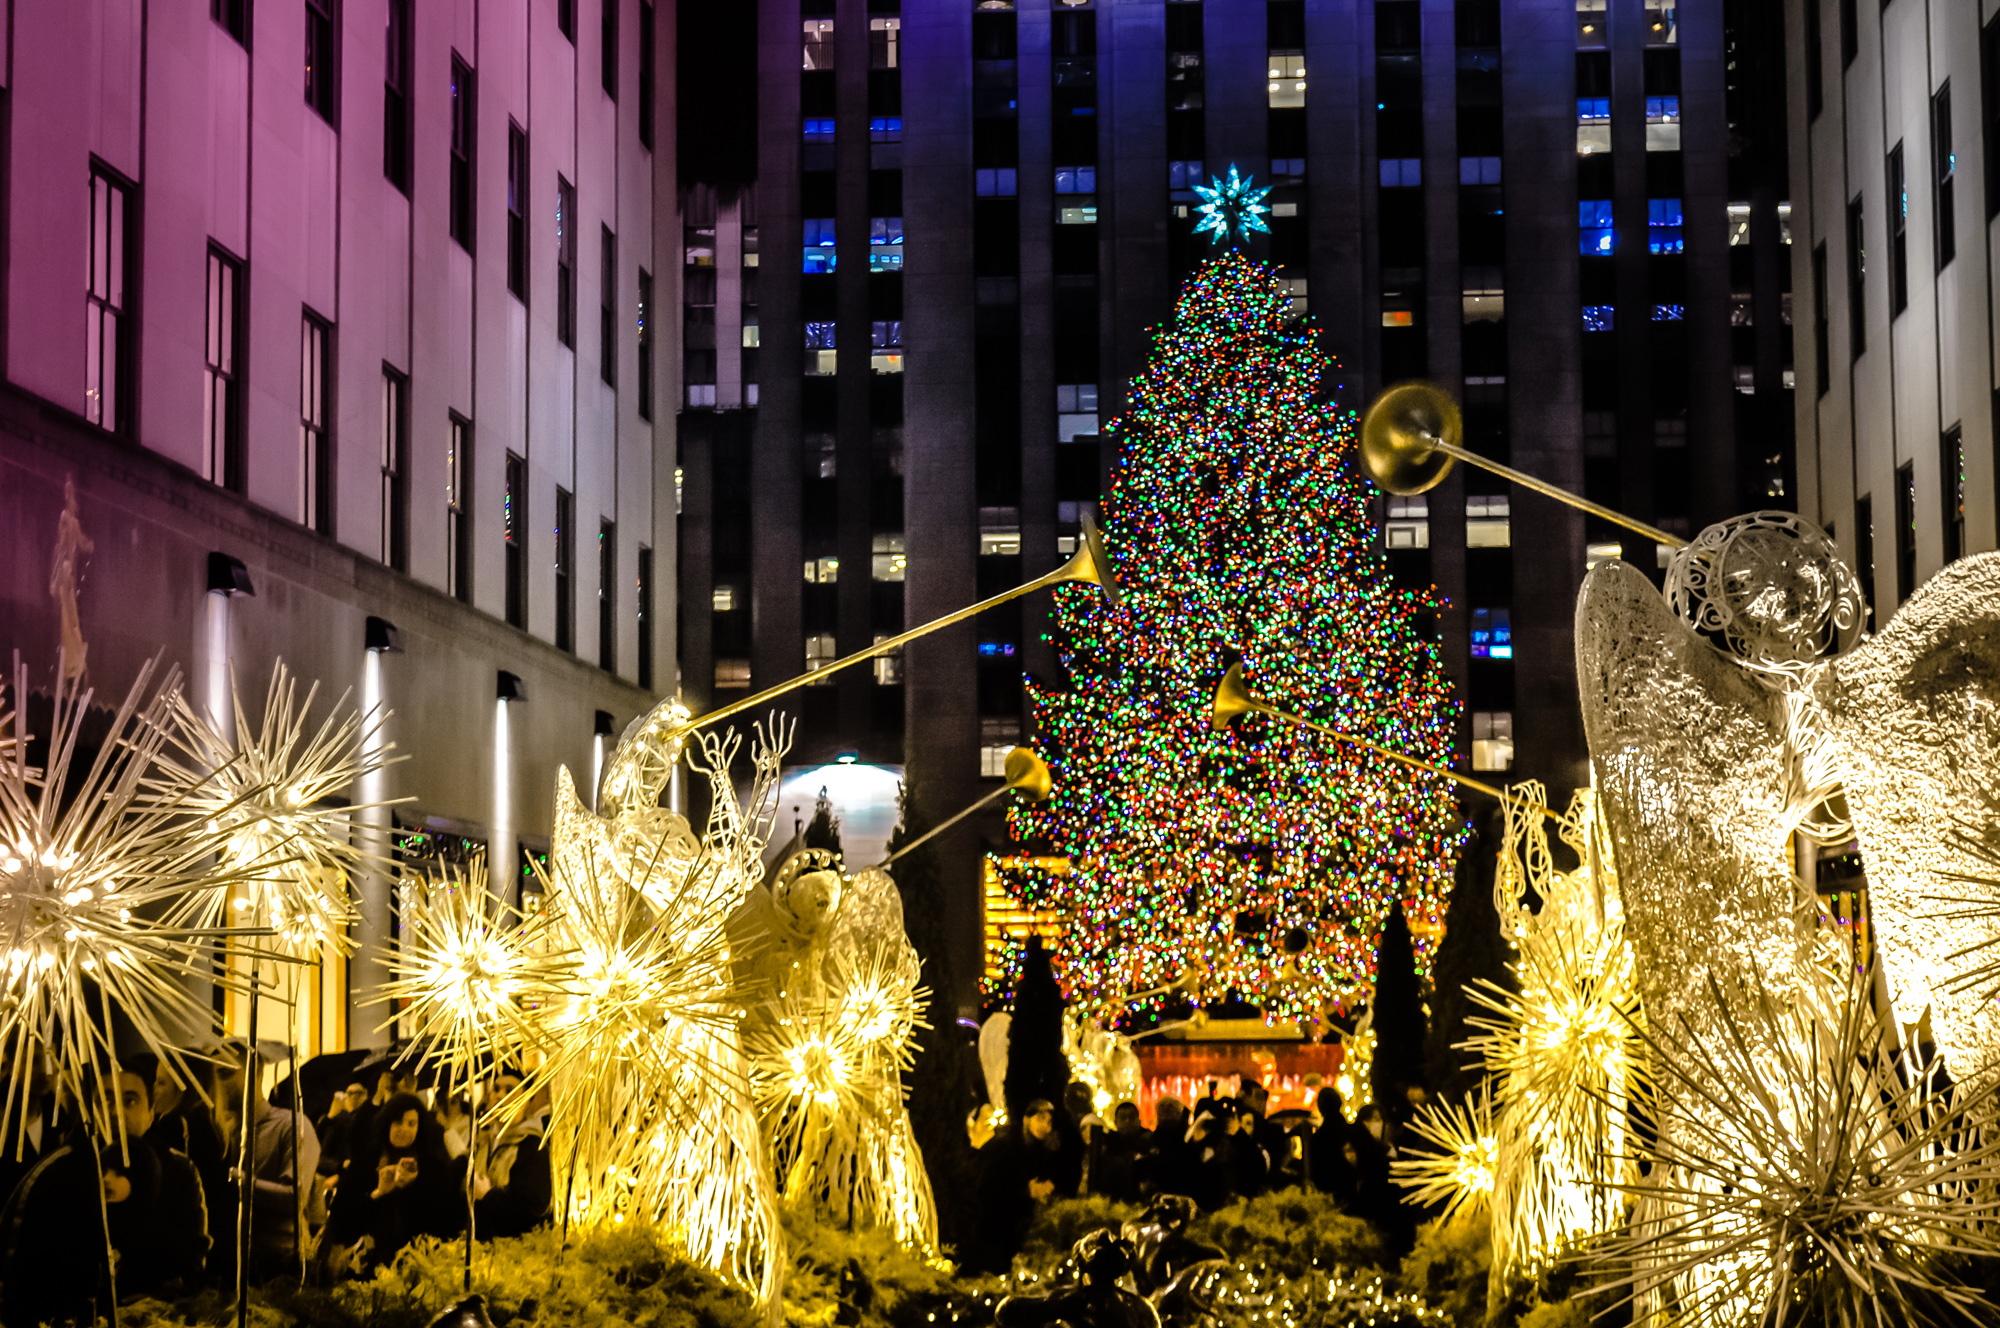 Decked up in lights and with trees in every corner, New York offers pop-up holiday markets, concerts and the famous Radio City Christmas Spectacular Show.